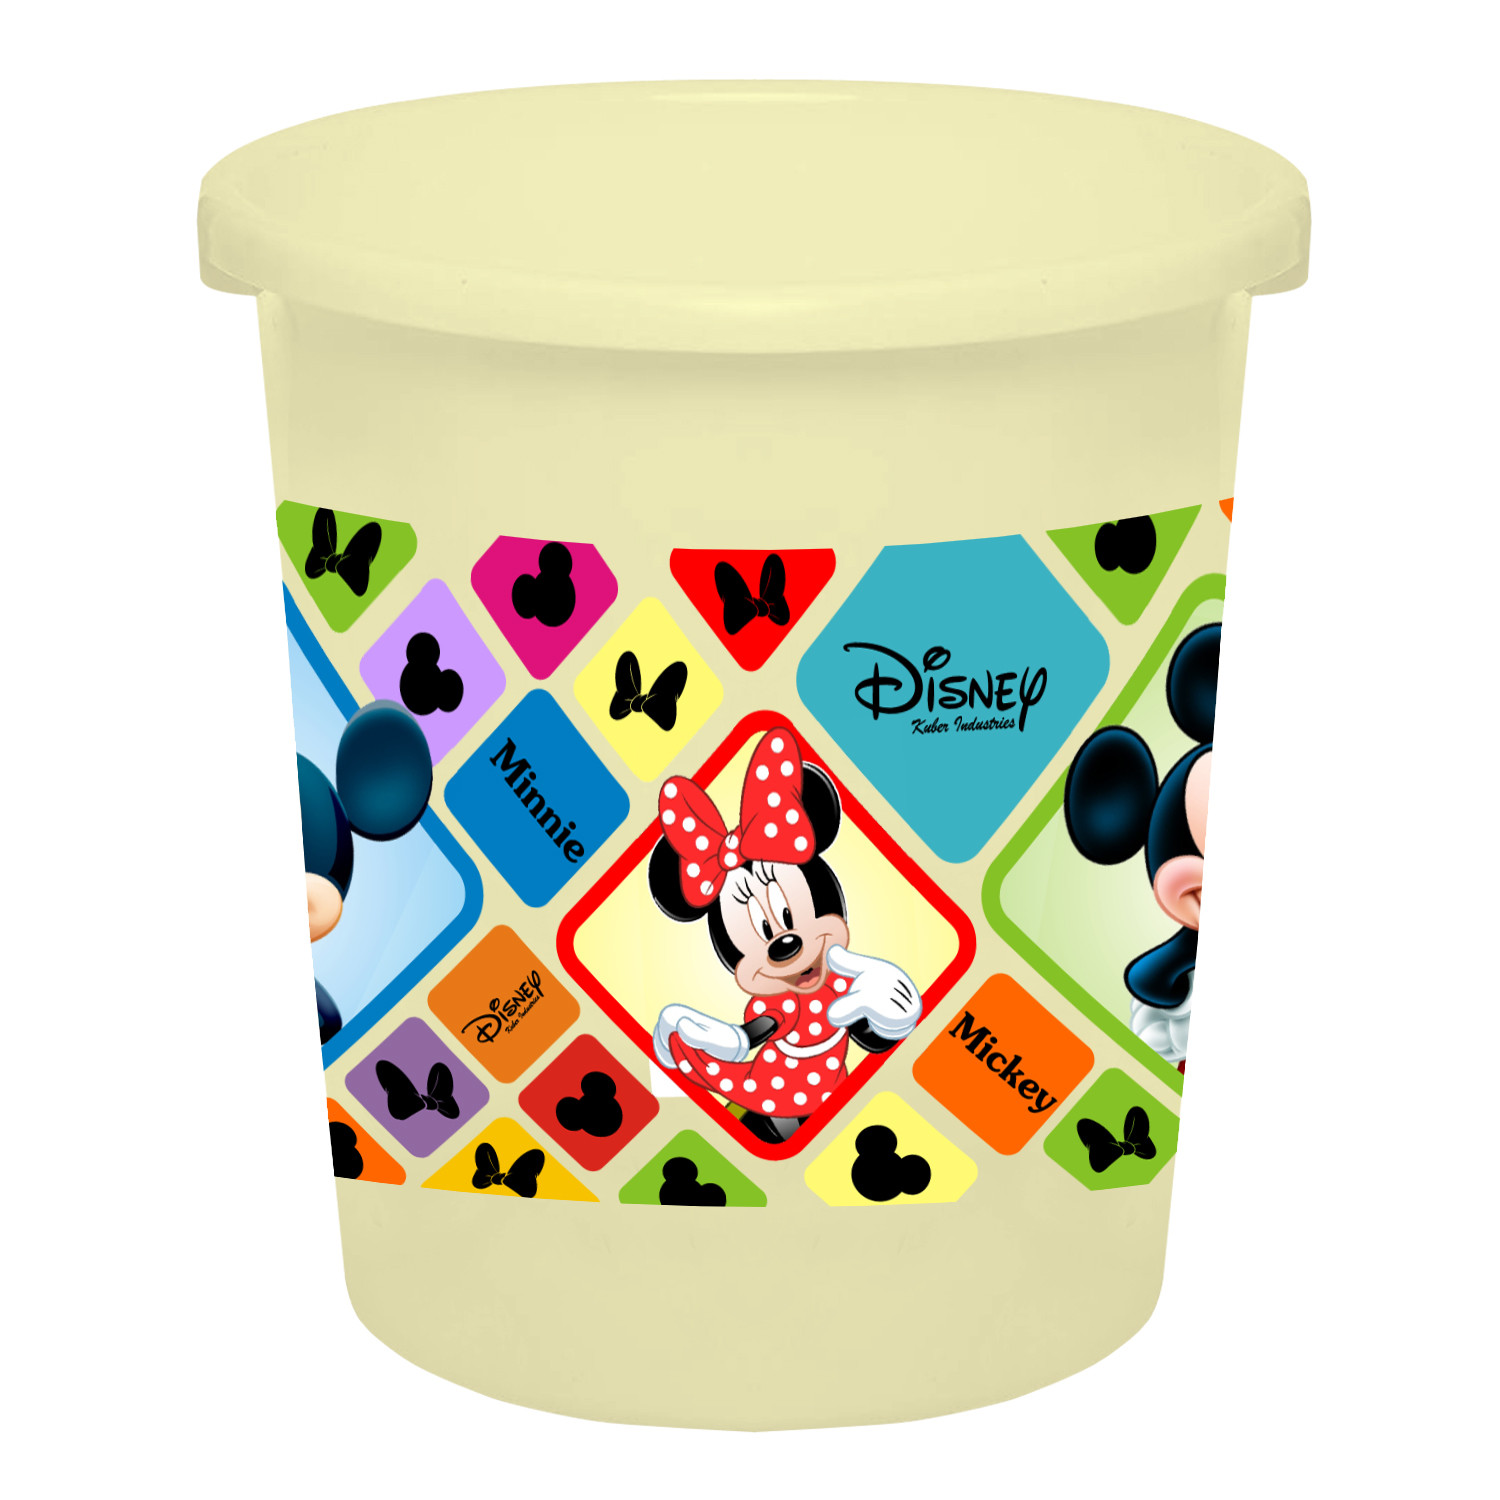 Kuber Industries Disney Mickey Minnie Print Plastic 3 Pieces Garbage Waste Dustbin/Recycling Bin for Home, Office, Factory, 5 Liters (Pink & Cream & White) -HS_35_KUBMART17809